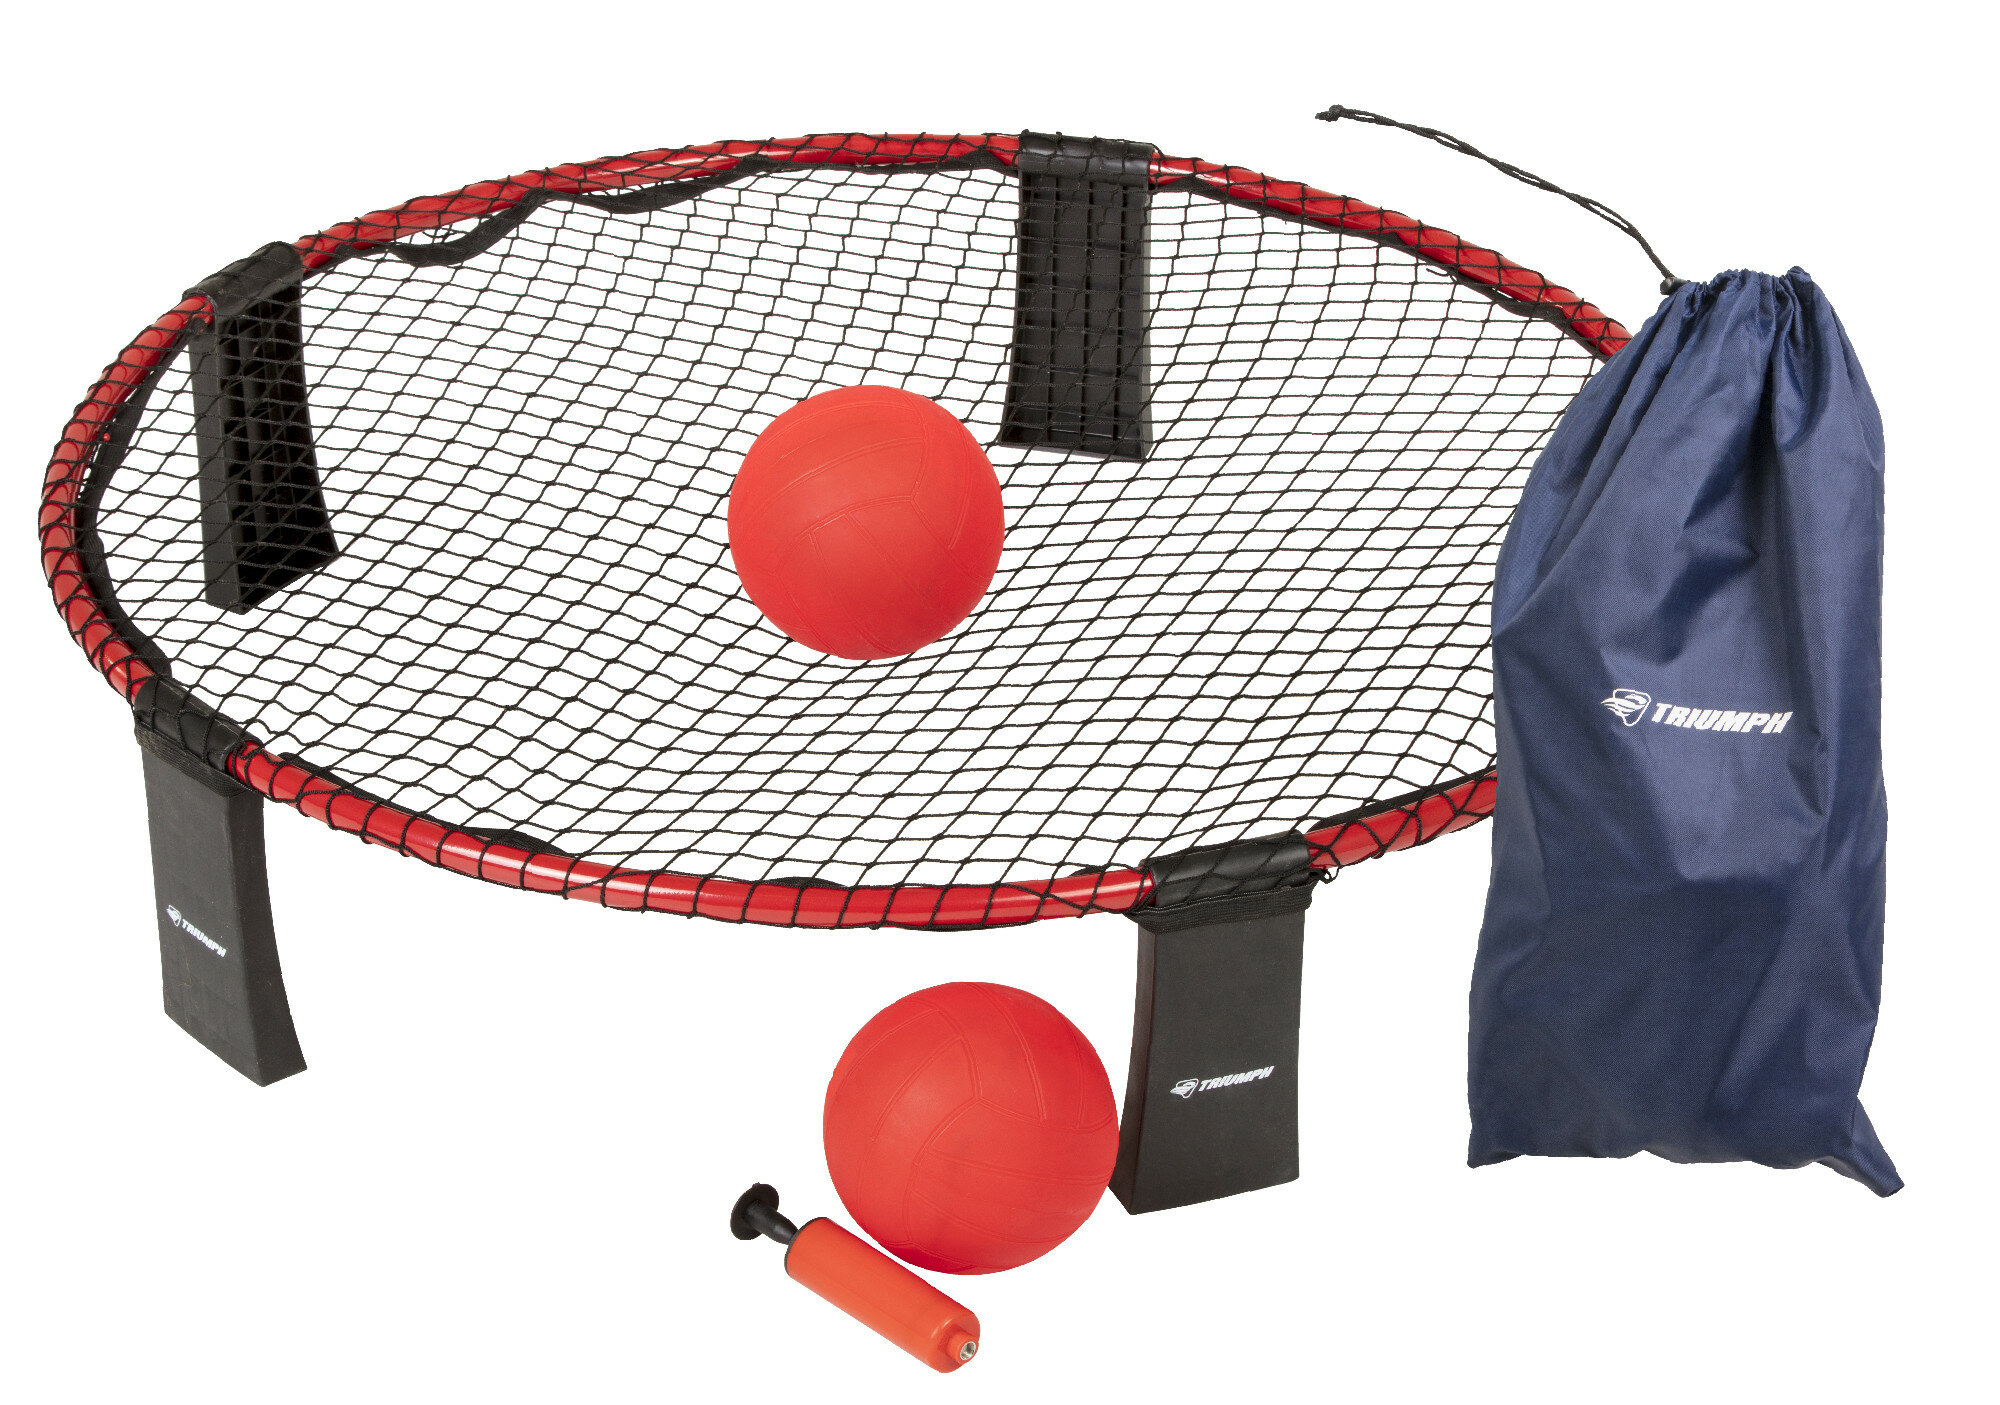 NEW Triumph Beach Volleyball Set FREE SHIPPING